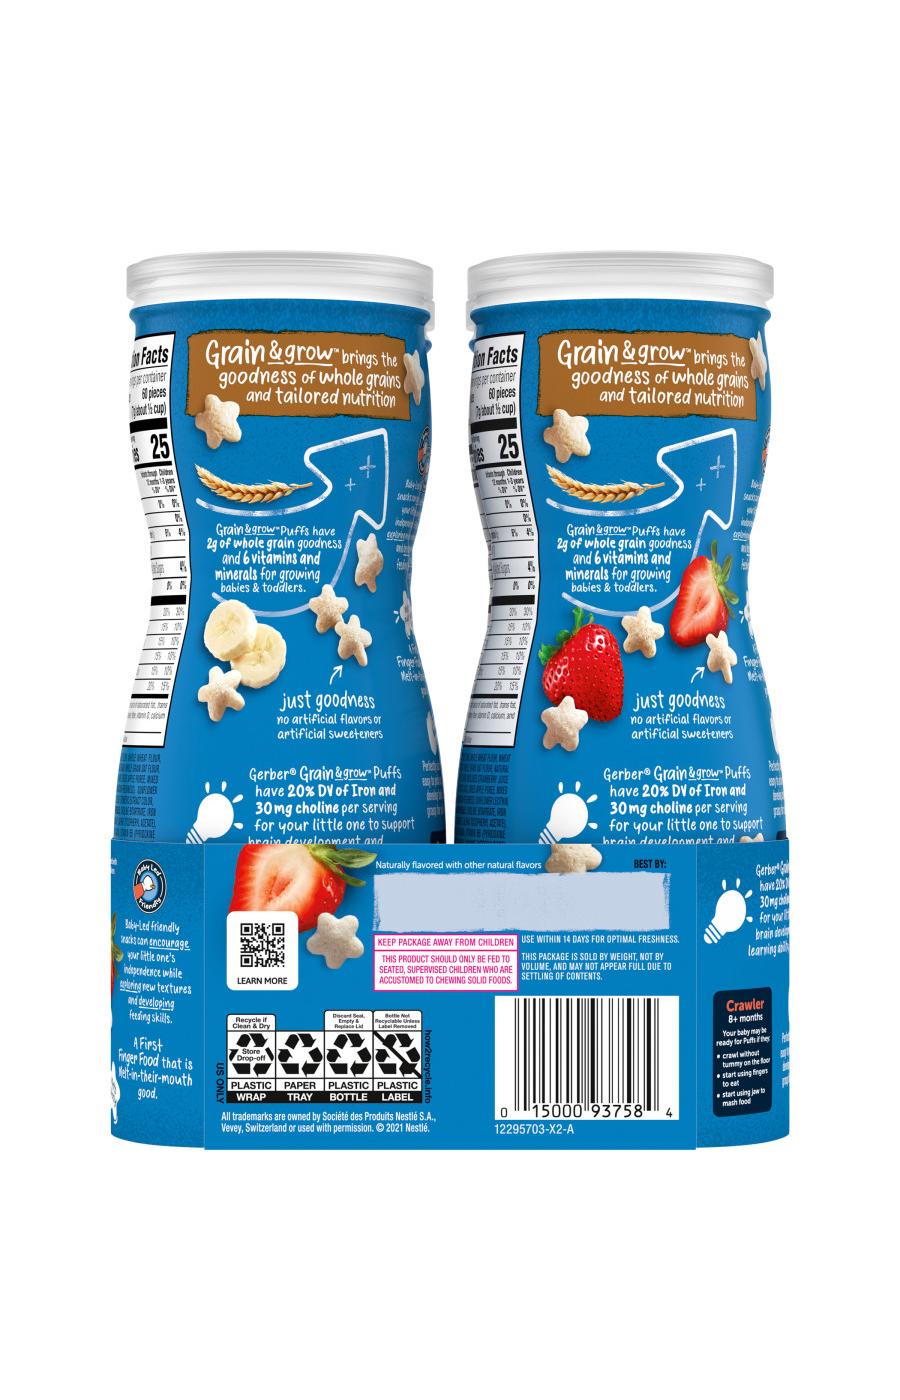 Gerber Snacks for Baby Grain & Grow Puffs Variety Pack - Banana & Strawberry Apple; image 2 of 8